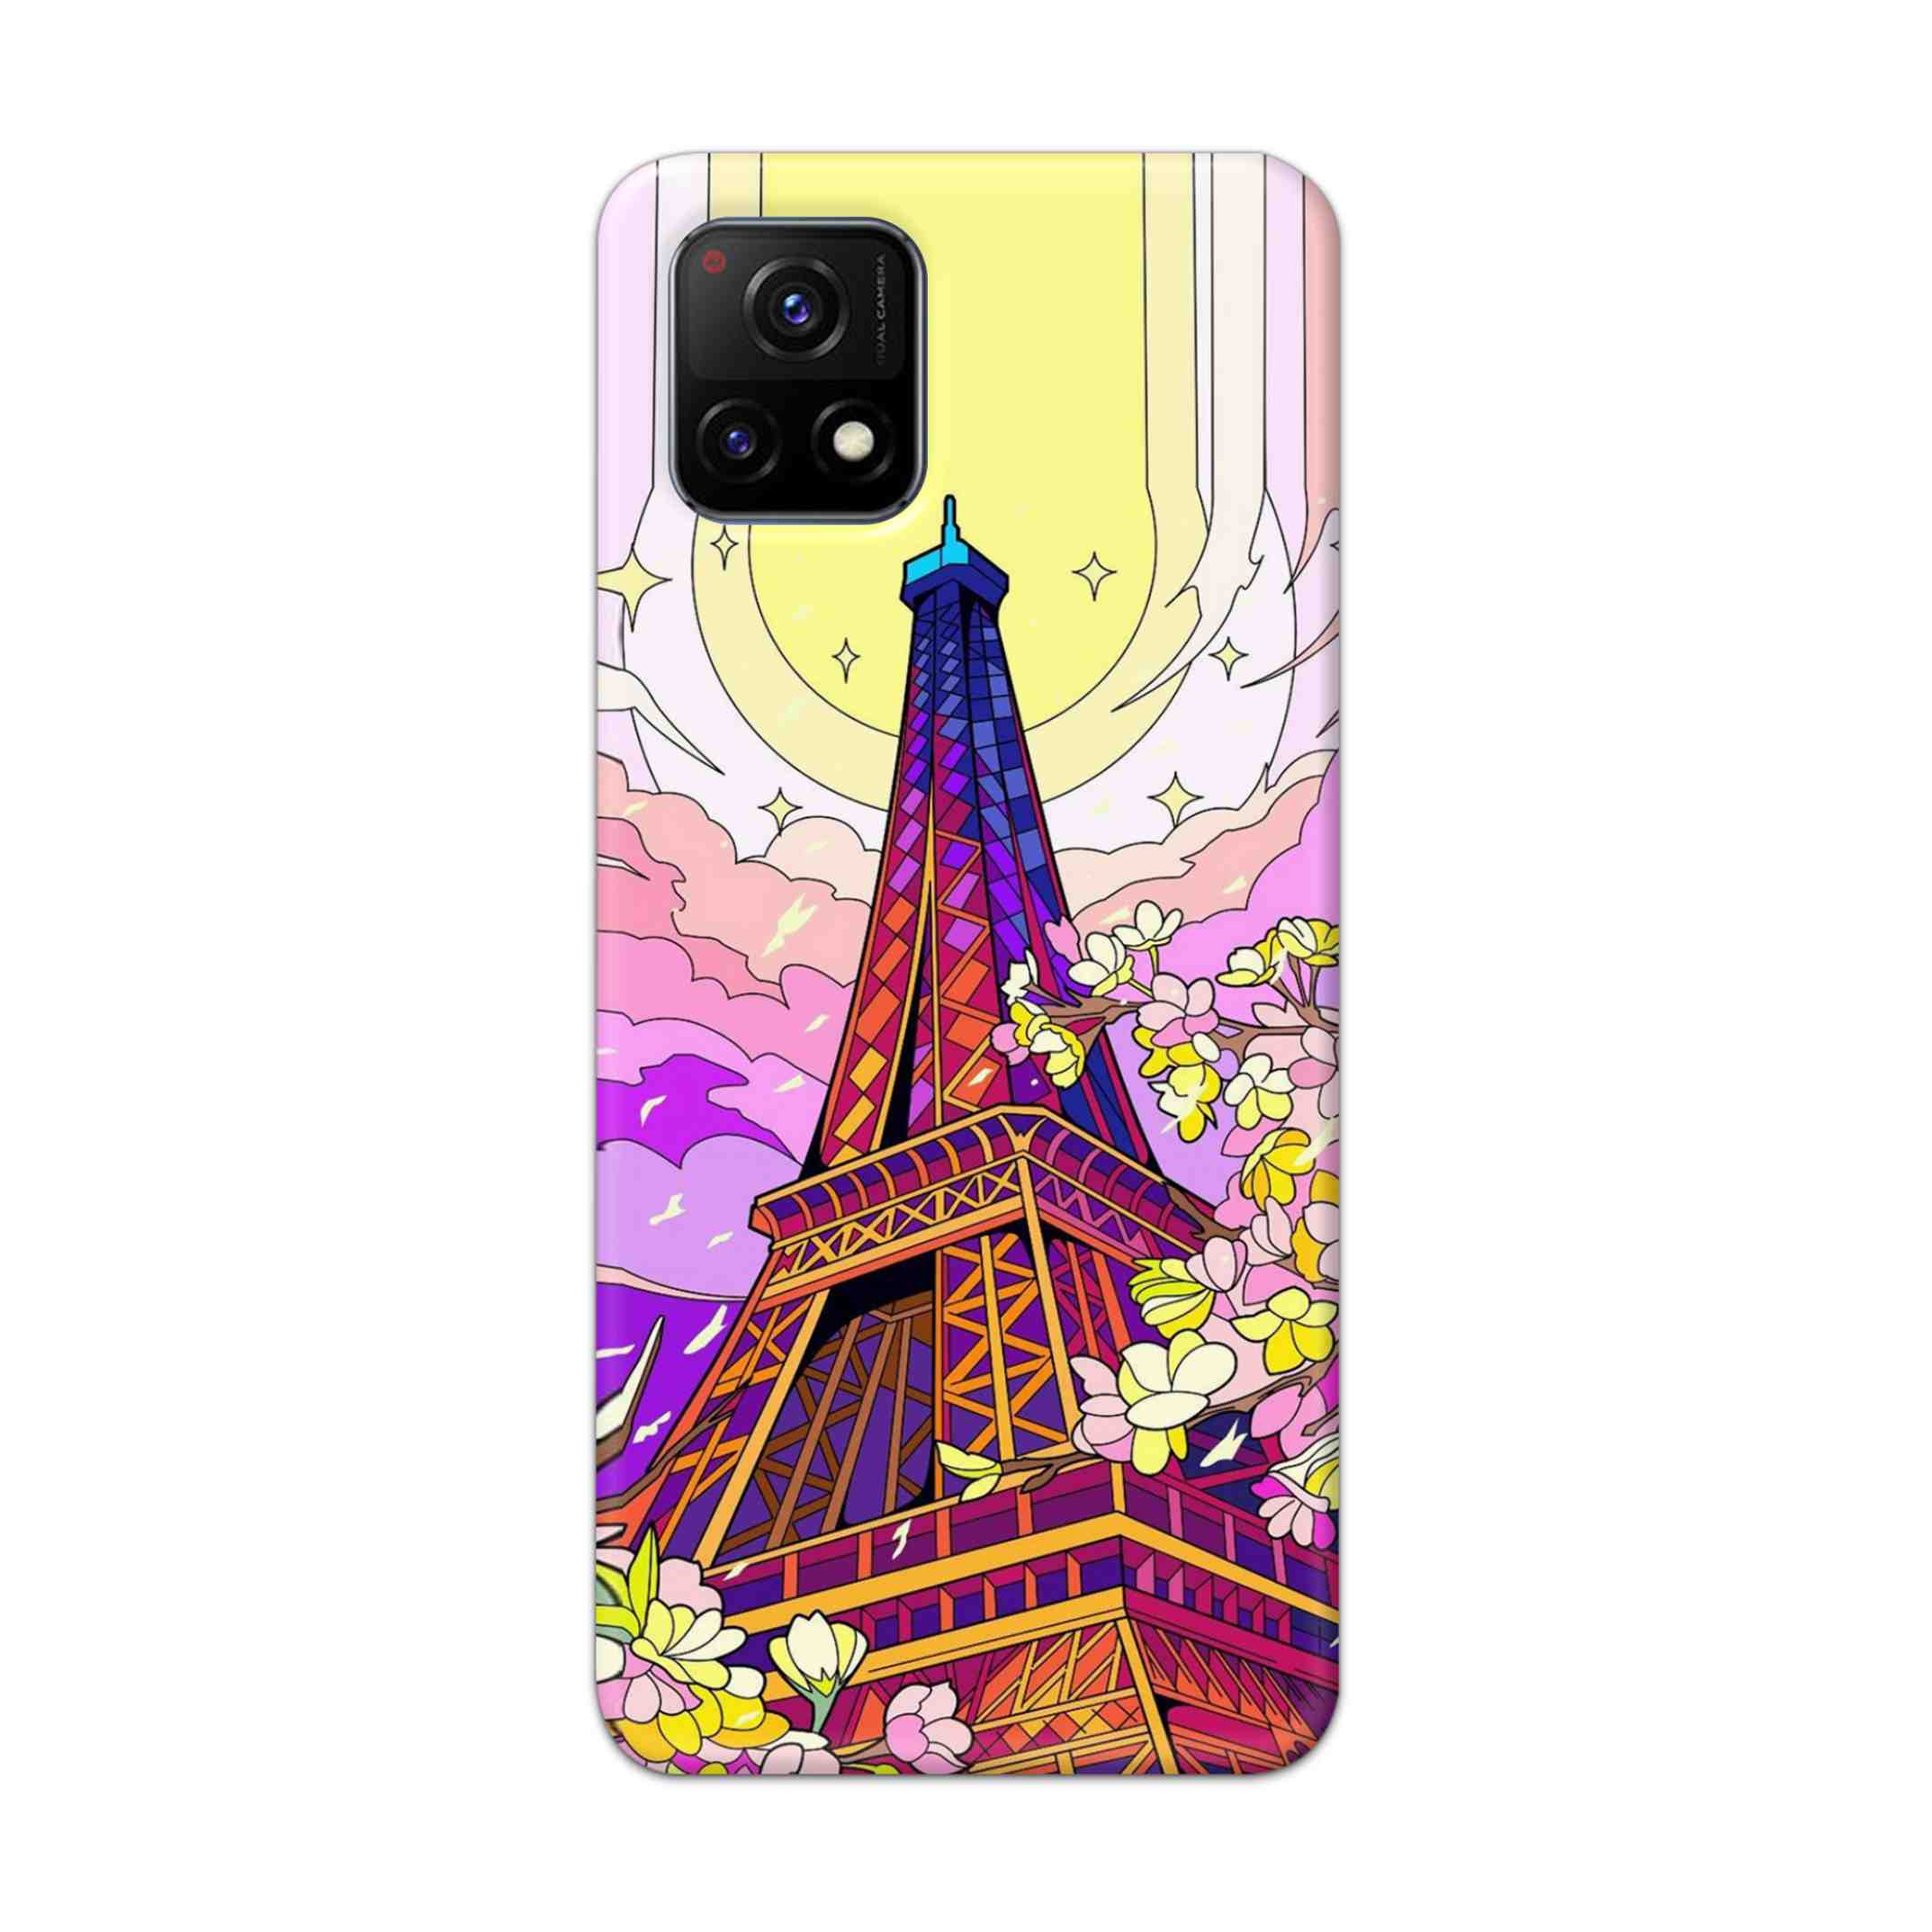 Buy Eiffel Tower Hard Back Mobile Phone Case Cover For Vivo Y72 5G Online